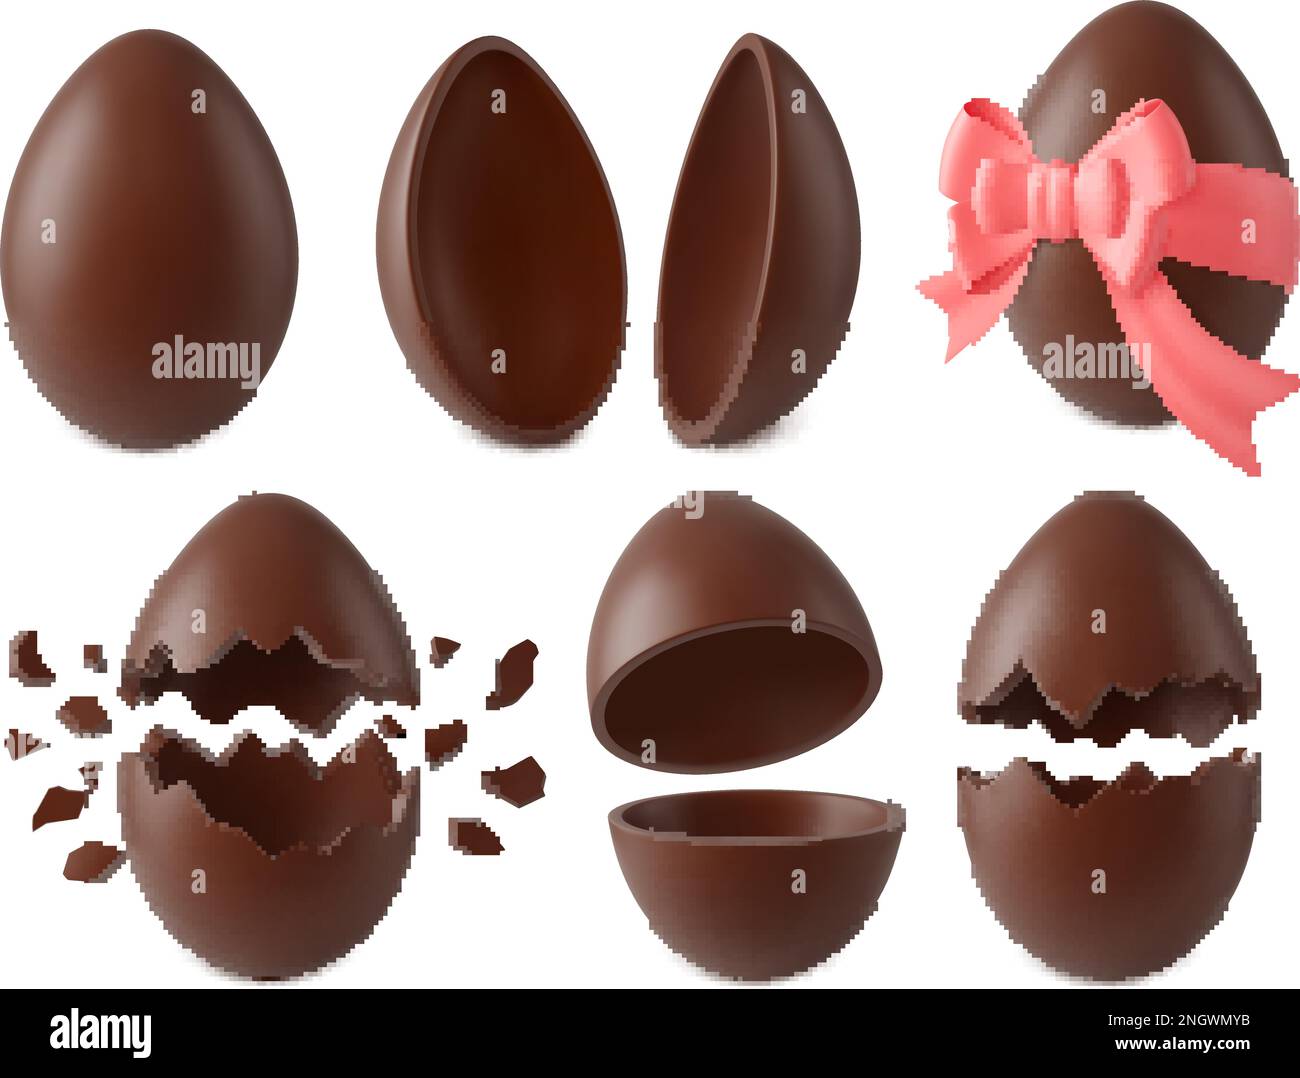 Easter chocolate eggs kinder Cut Out Stock Images & Pictures - Alamy